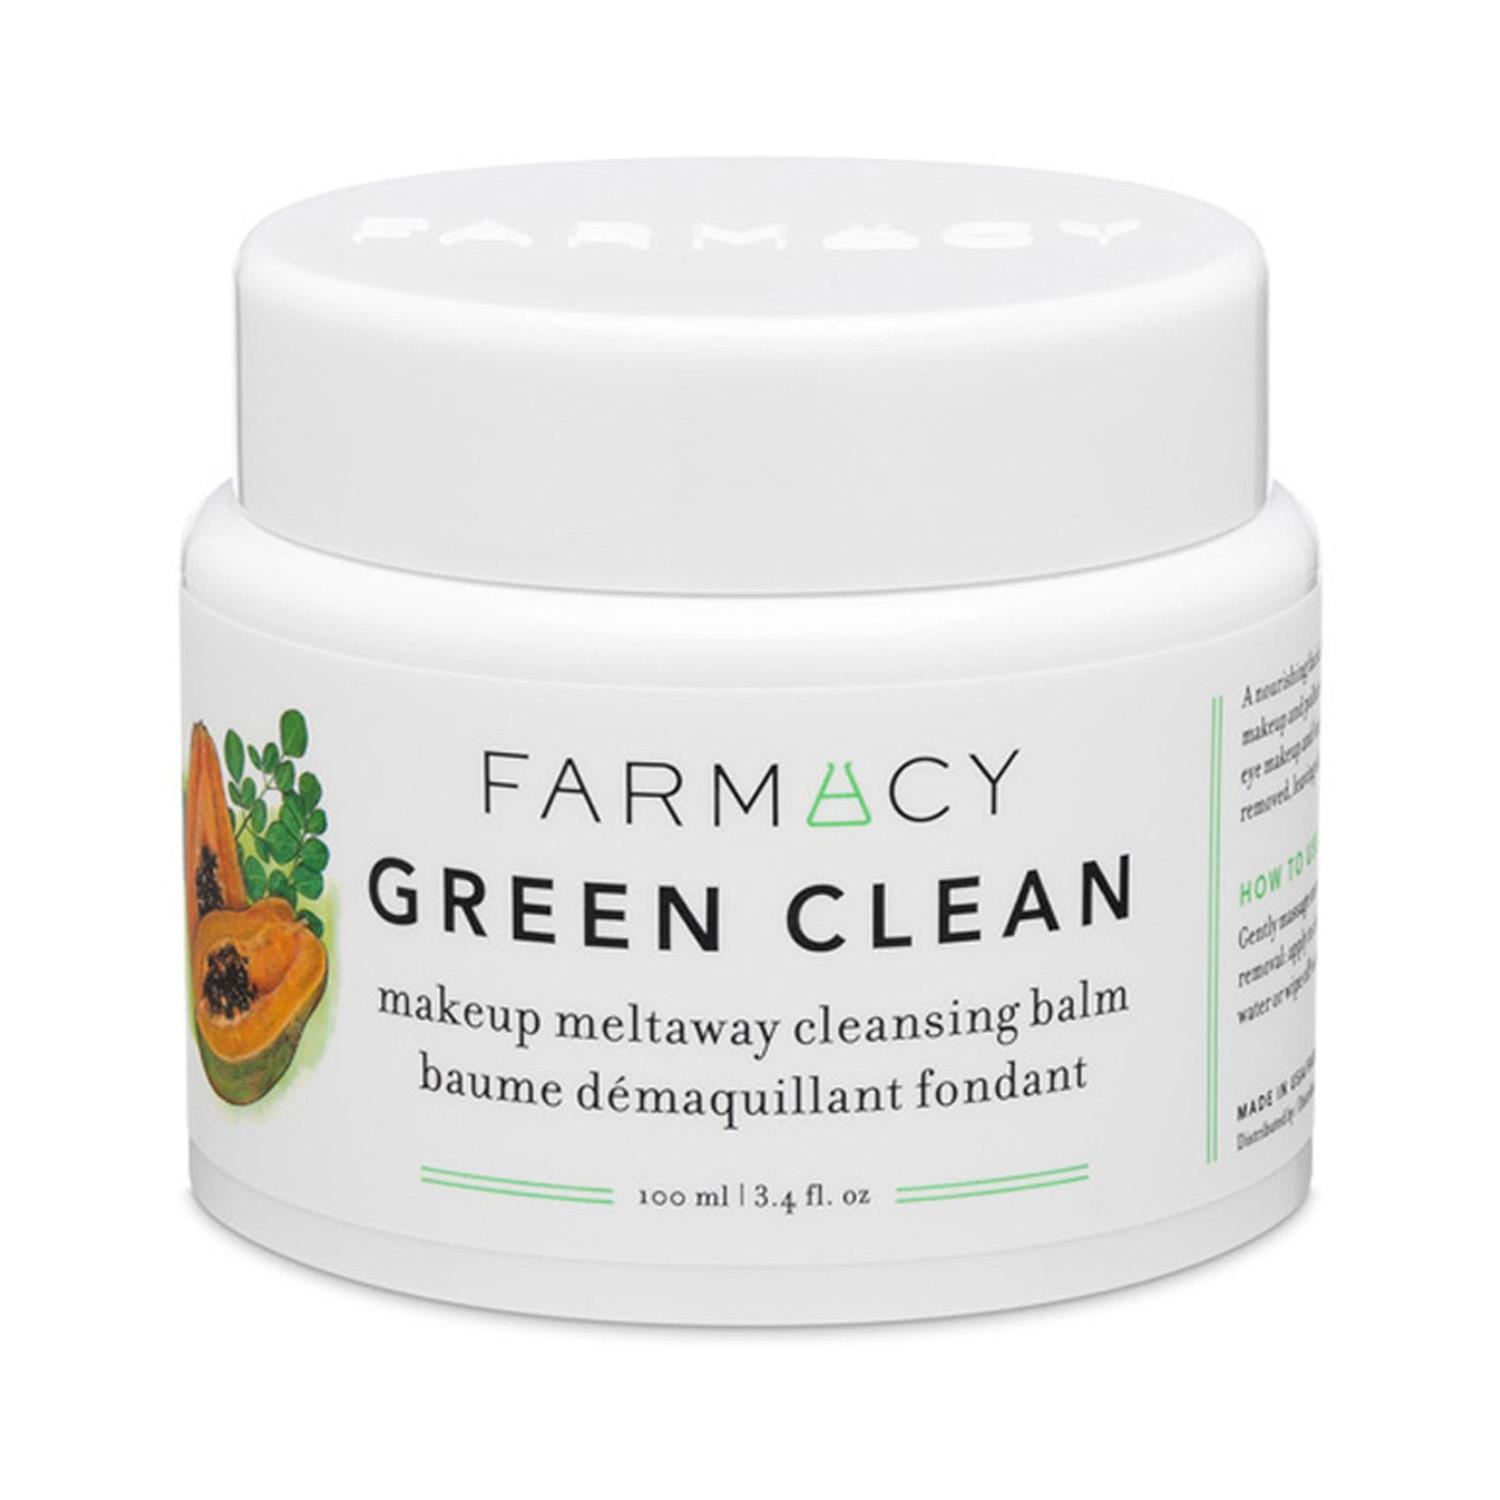 Farmacy Beauty Green Clean Makeup Removing Cleansing Balm (100ml)